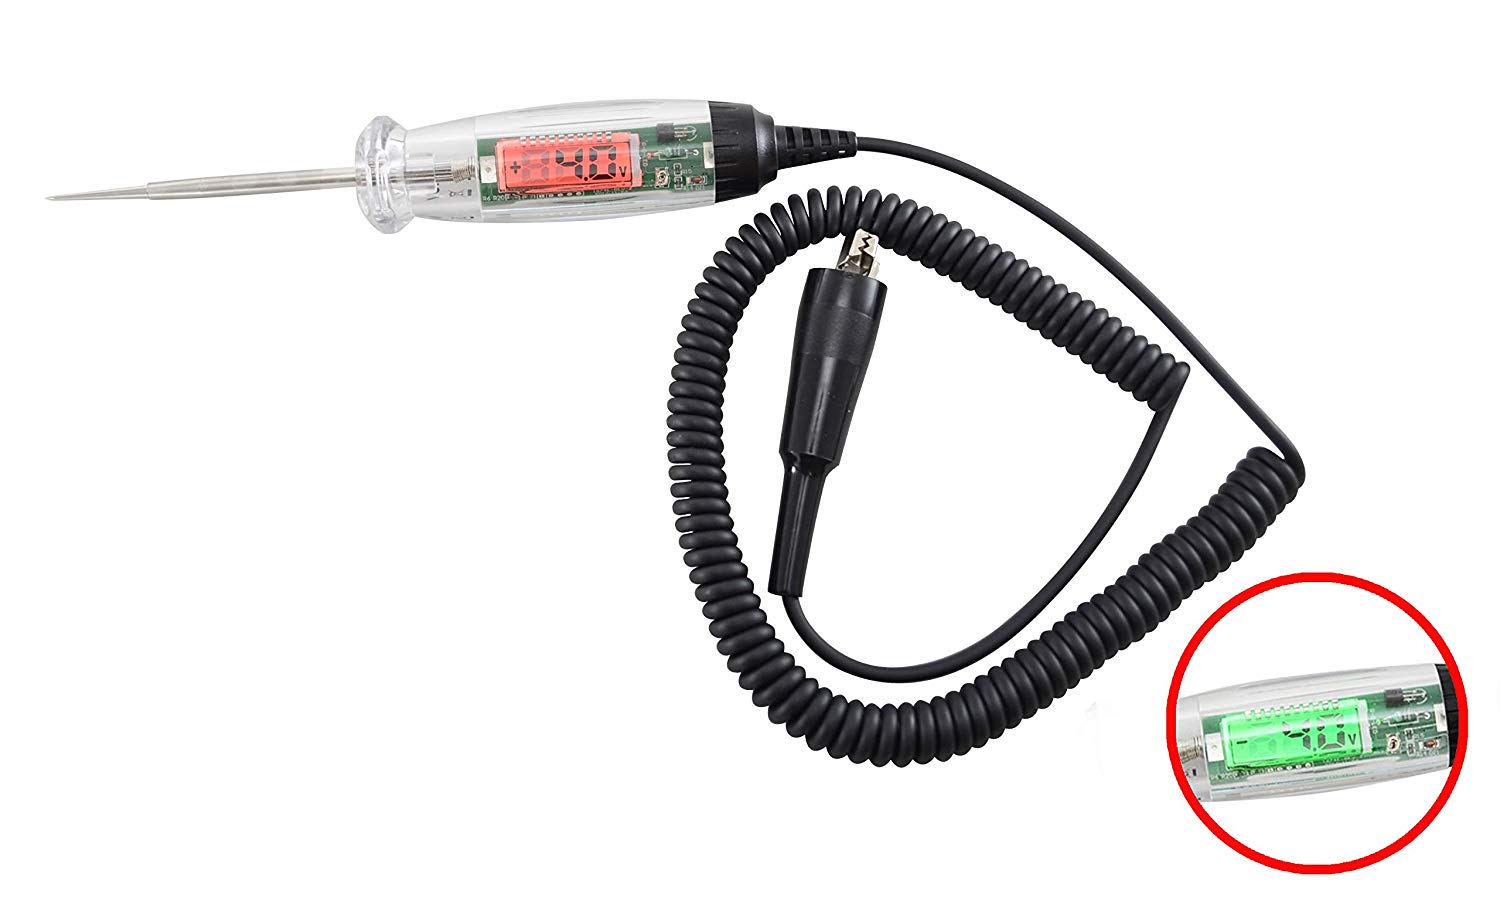 Astro Pneumatic Tool 7767 Digital LCD Wide Range Positive and Ground Circuit Tester - 3.5-60V - MPR Tools & Equipment